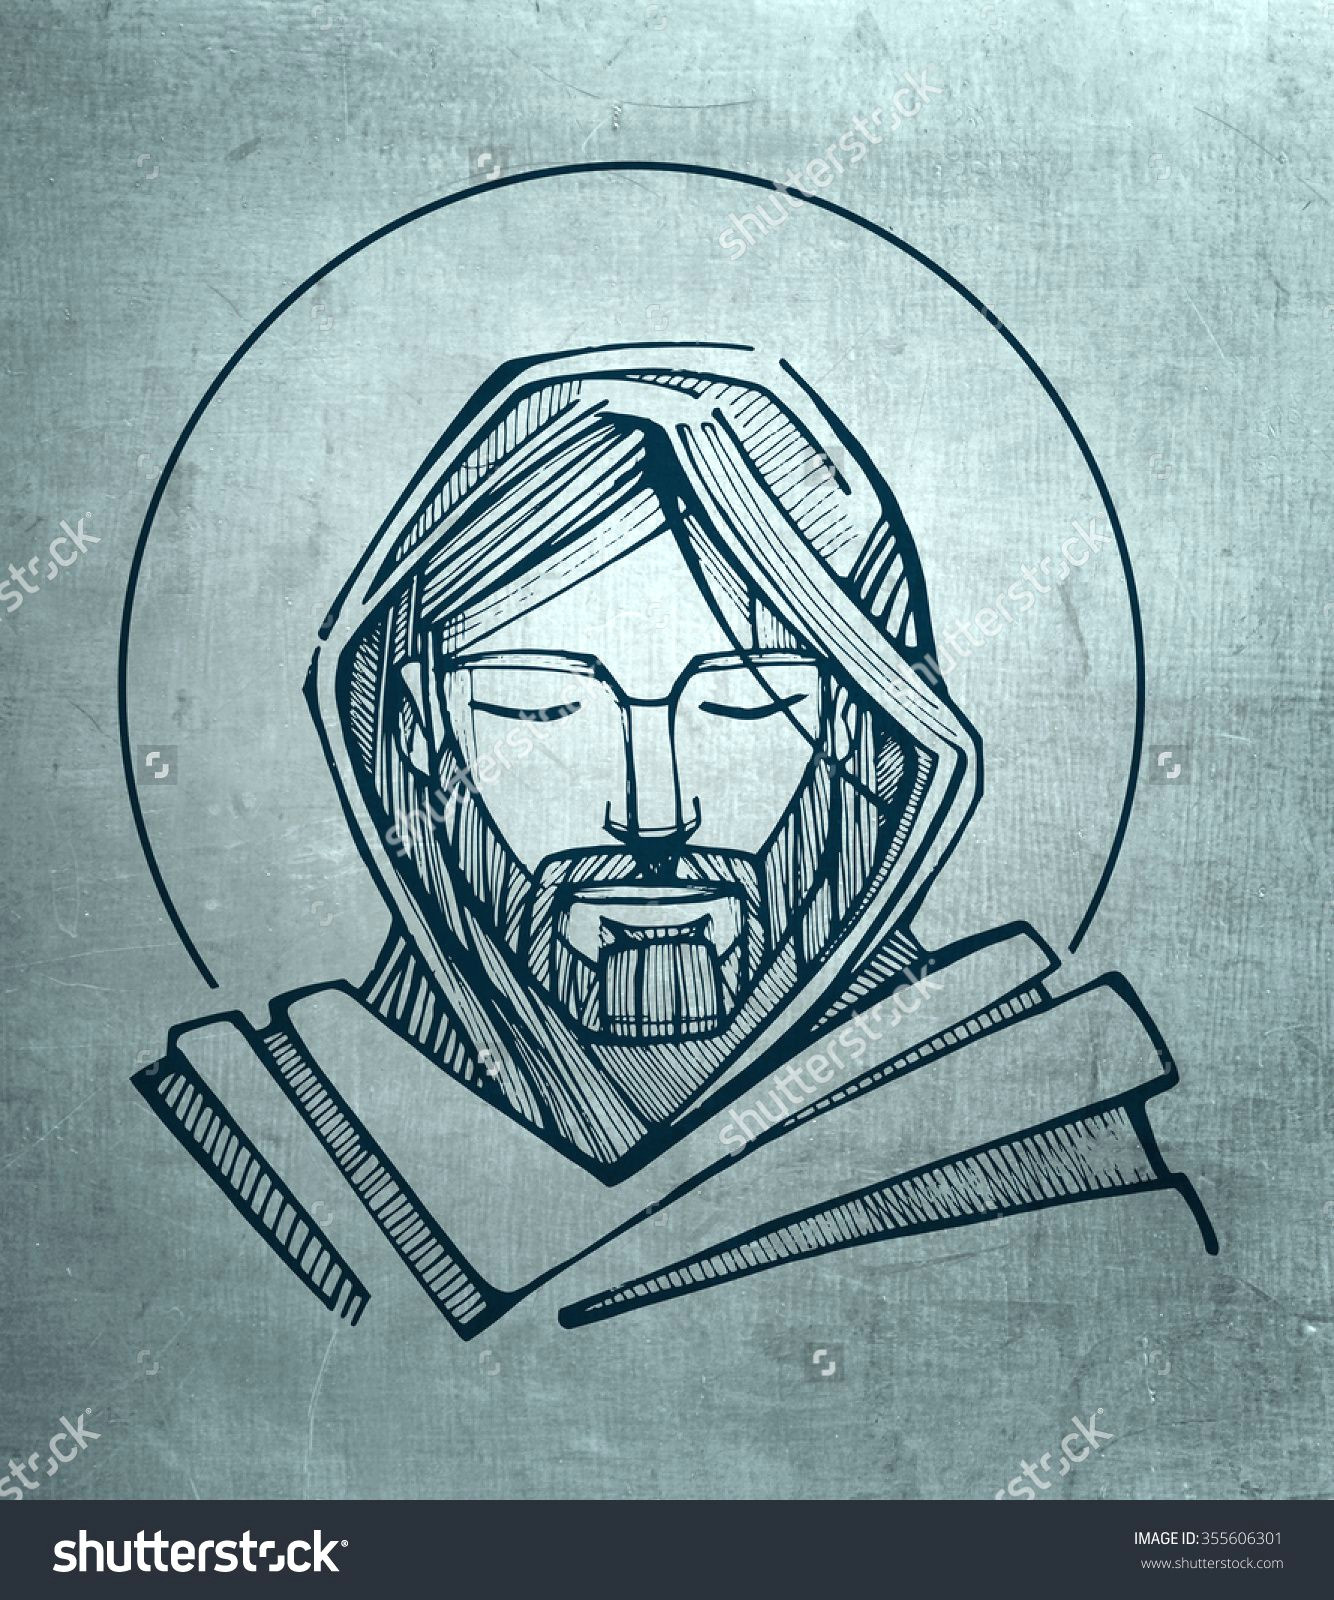 Drawings Of Jesus Hands Hand Drawn Illustration or Drawing Of Jesus Christ Serene Face